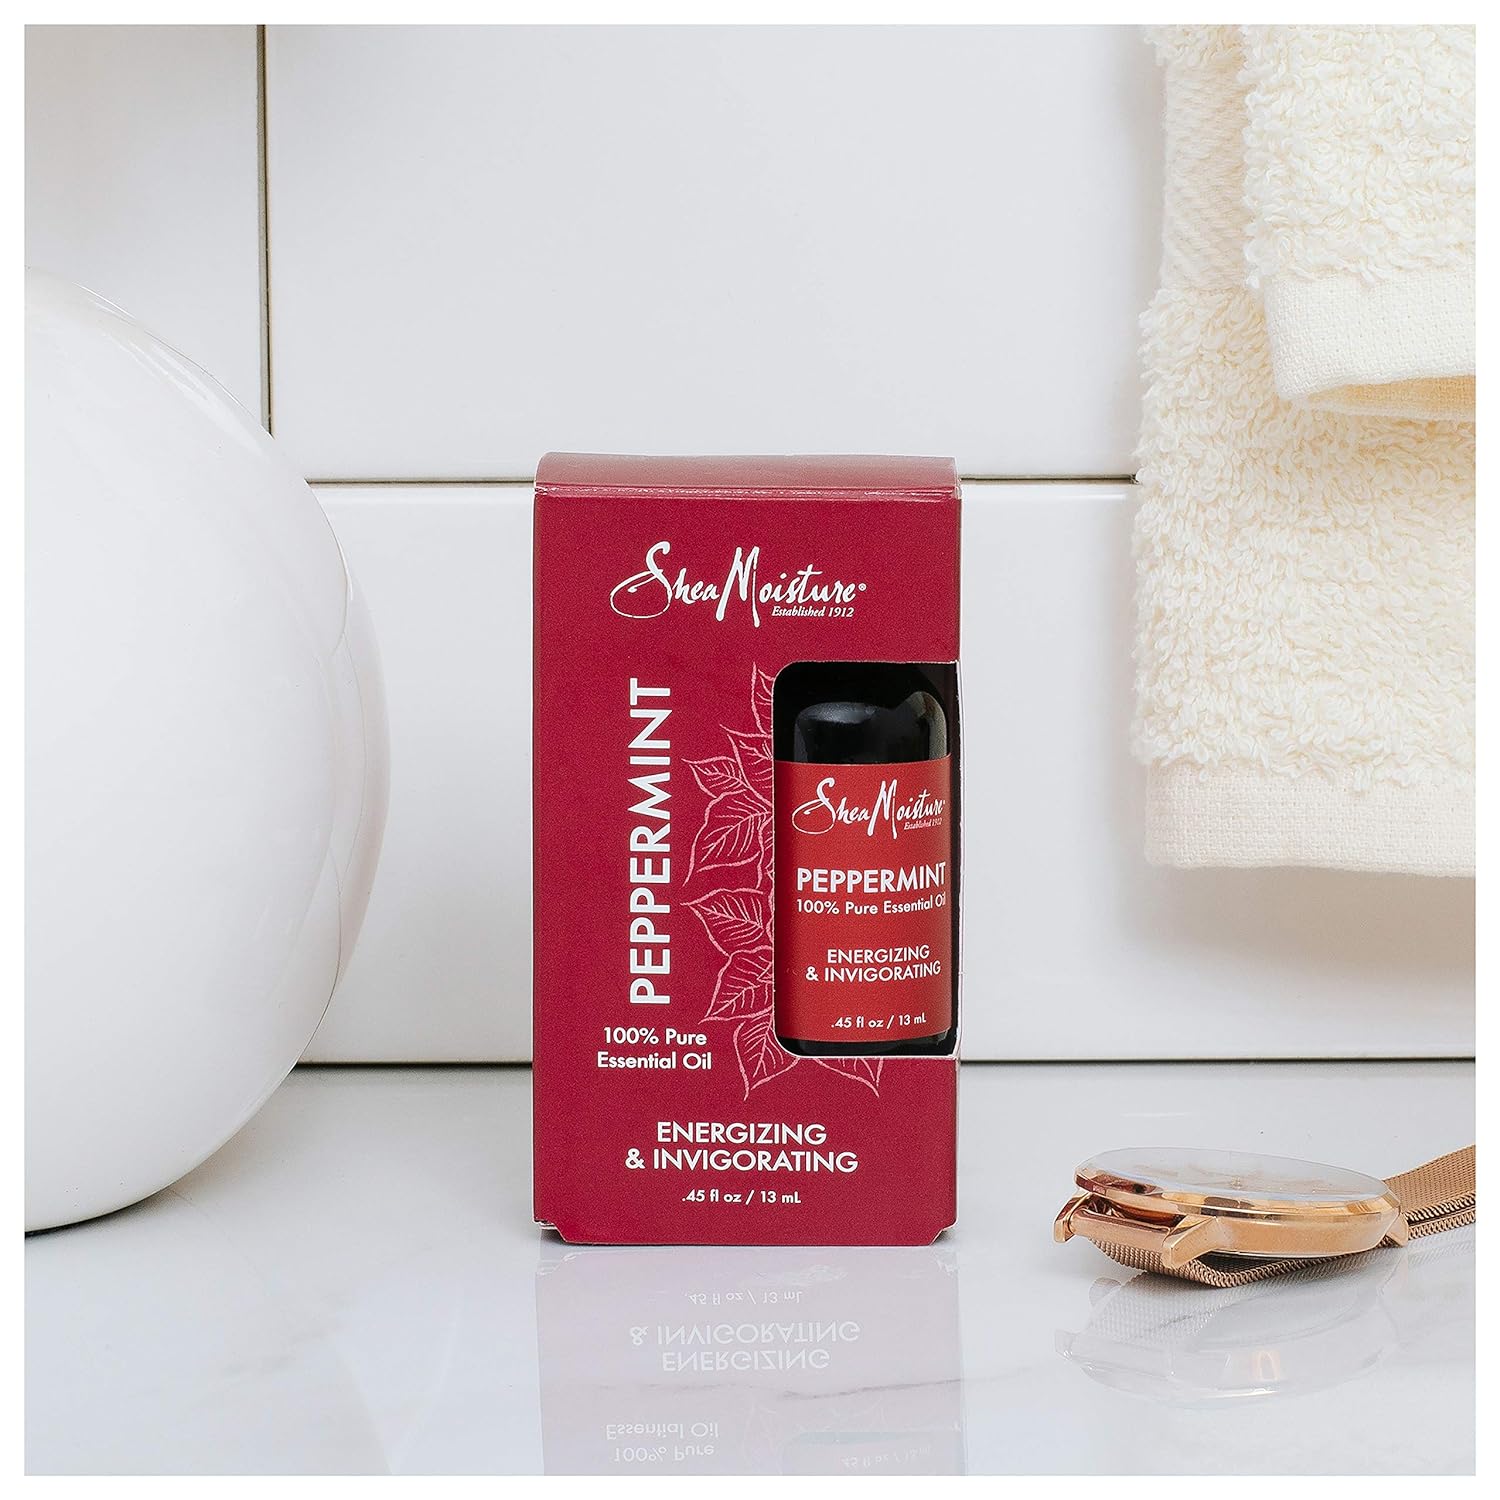 Sheamoisture 100% Pure Essential Oil to Uplift and Energize Peppermint Body Oil Sulfate Free and Paraben Free 0.45 oz : Beauty & Personal Care